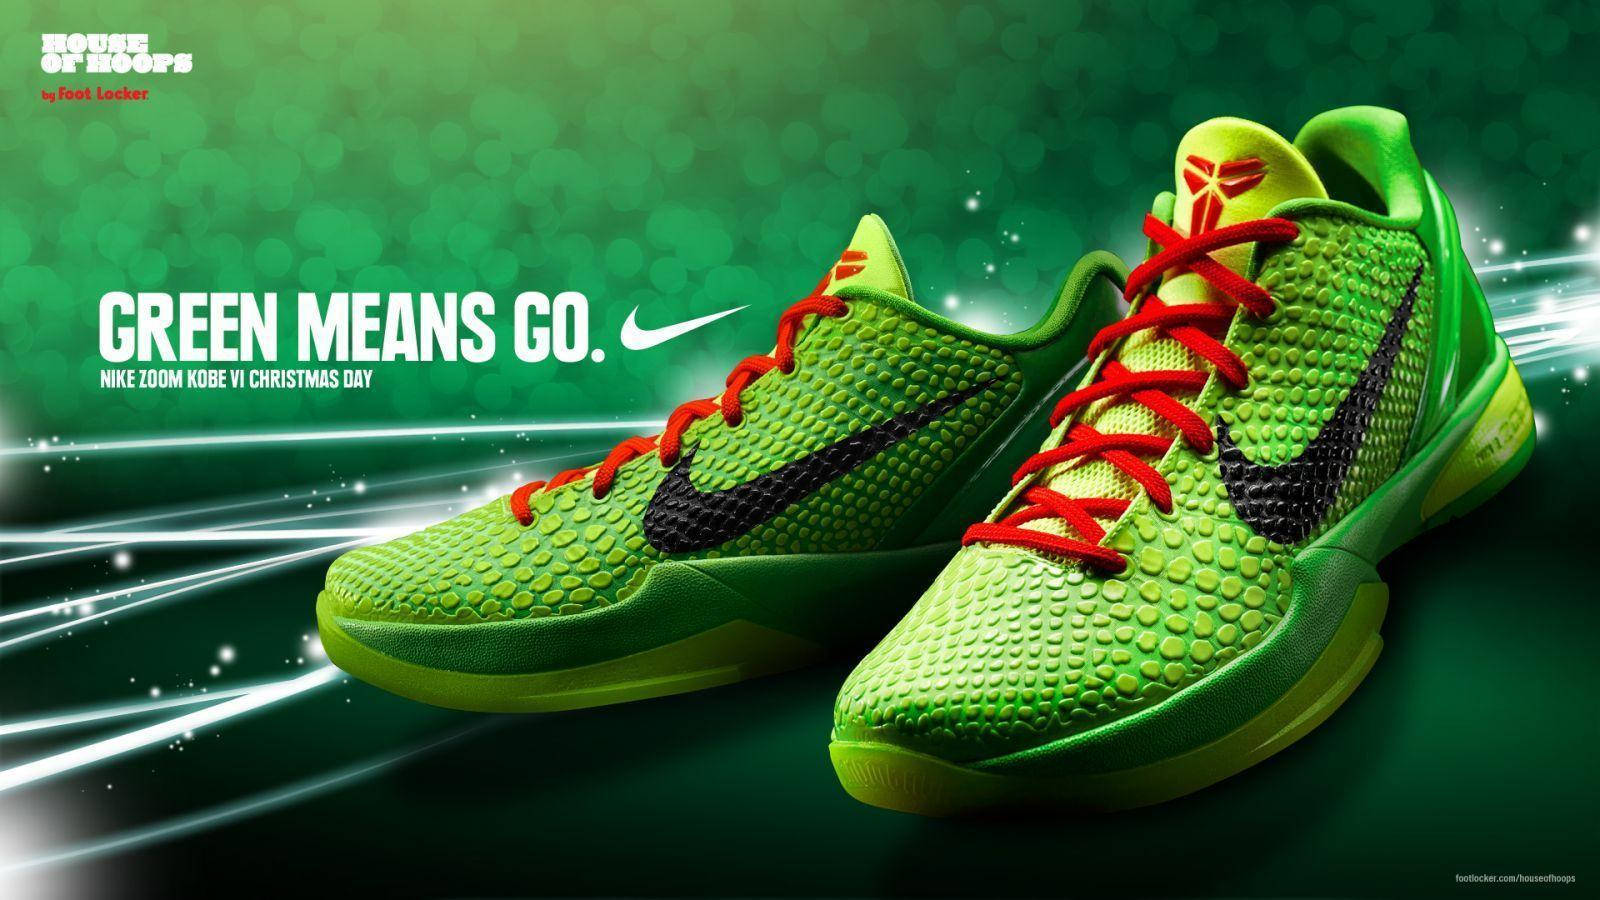 Free Green Shoes Wallpaper Downloads, Green Shoes Wallpaper for FREE